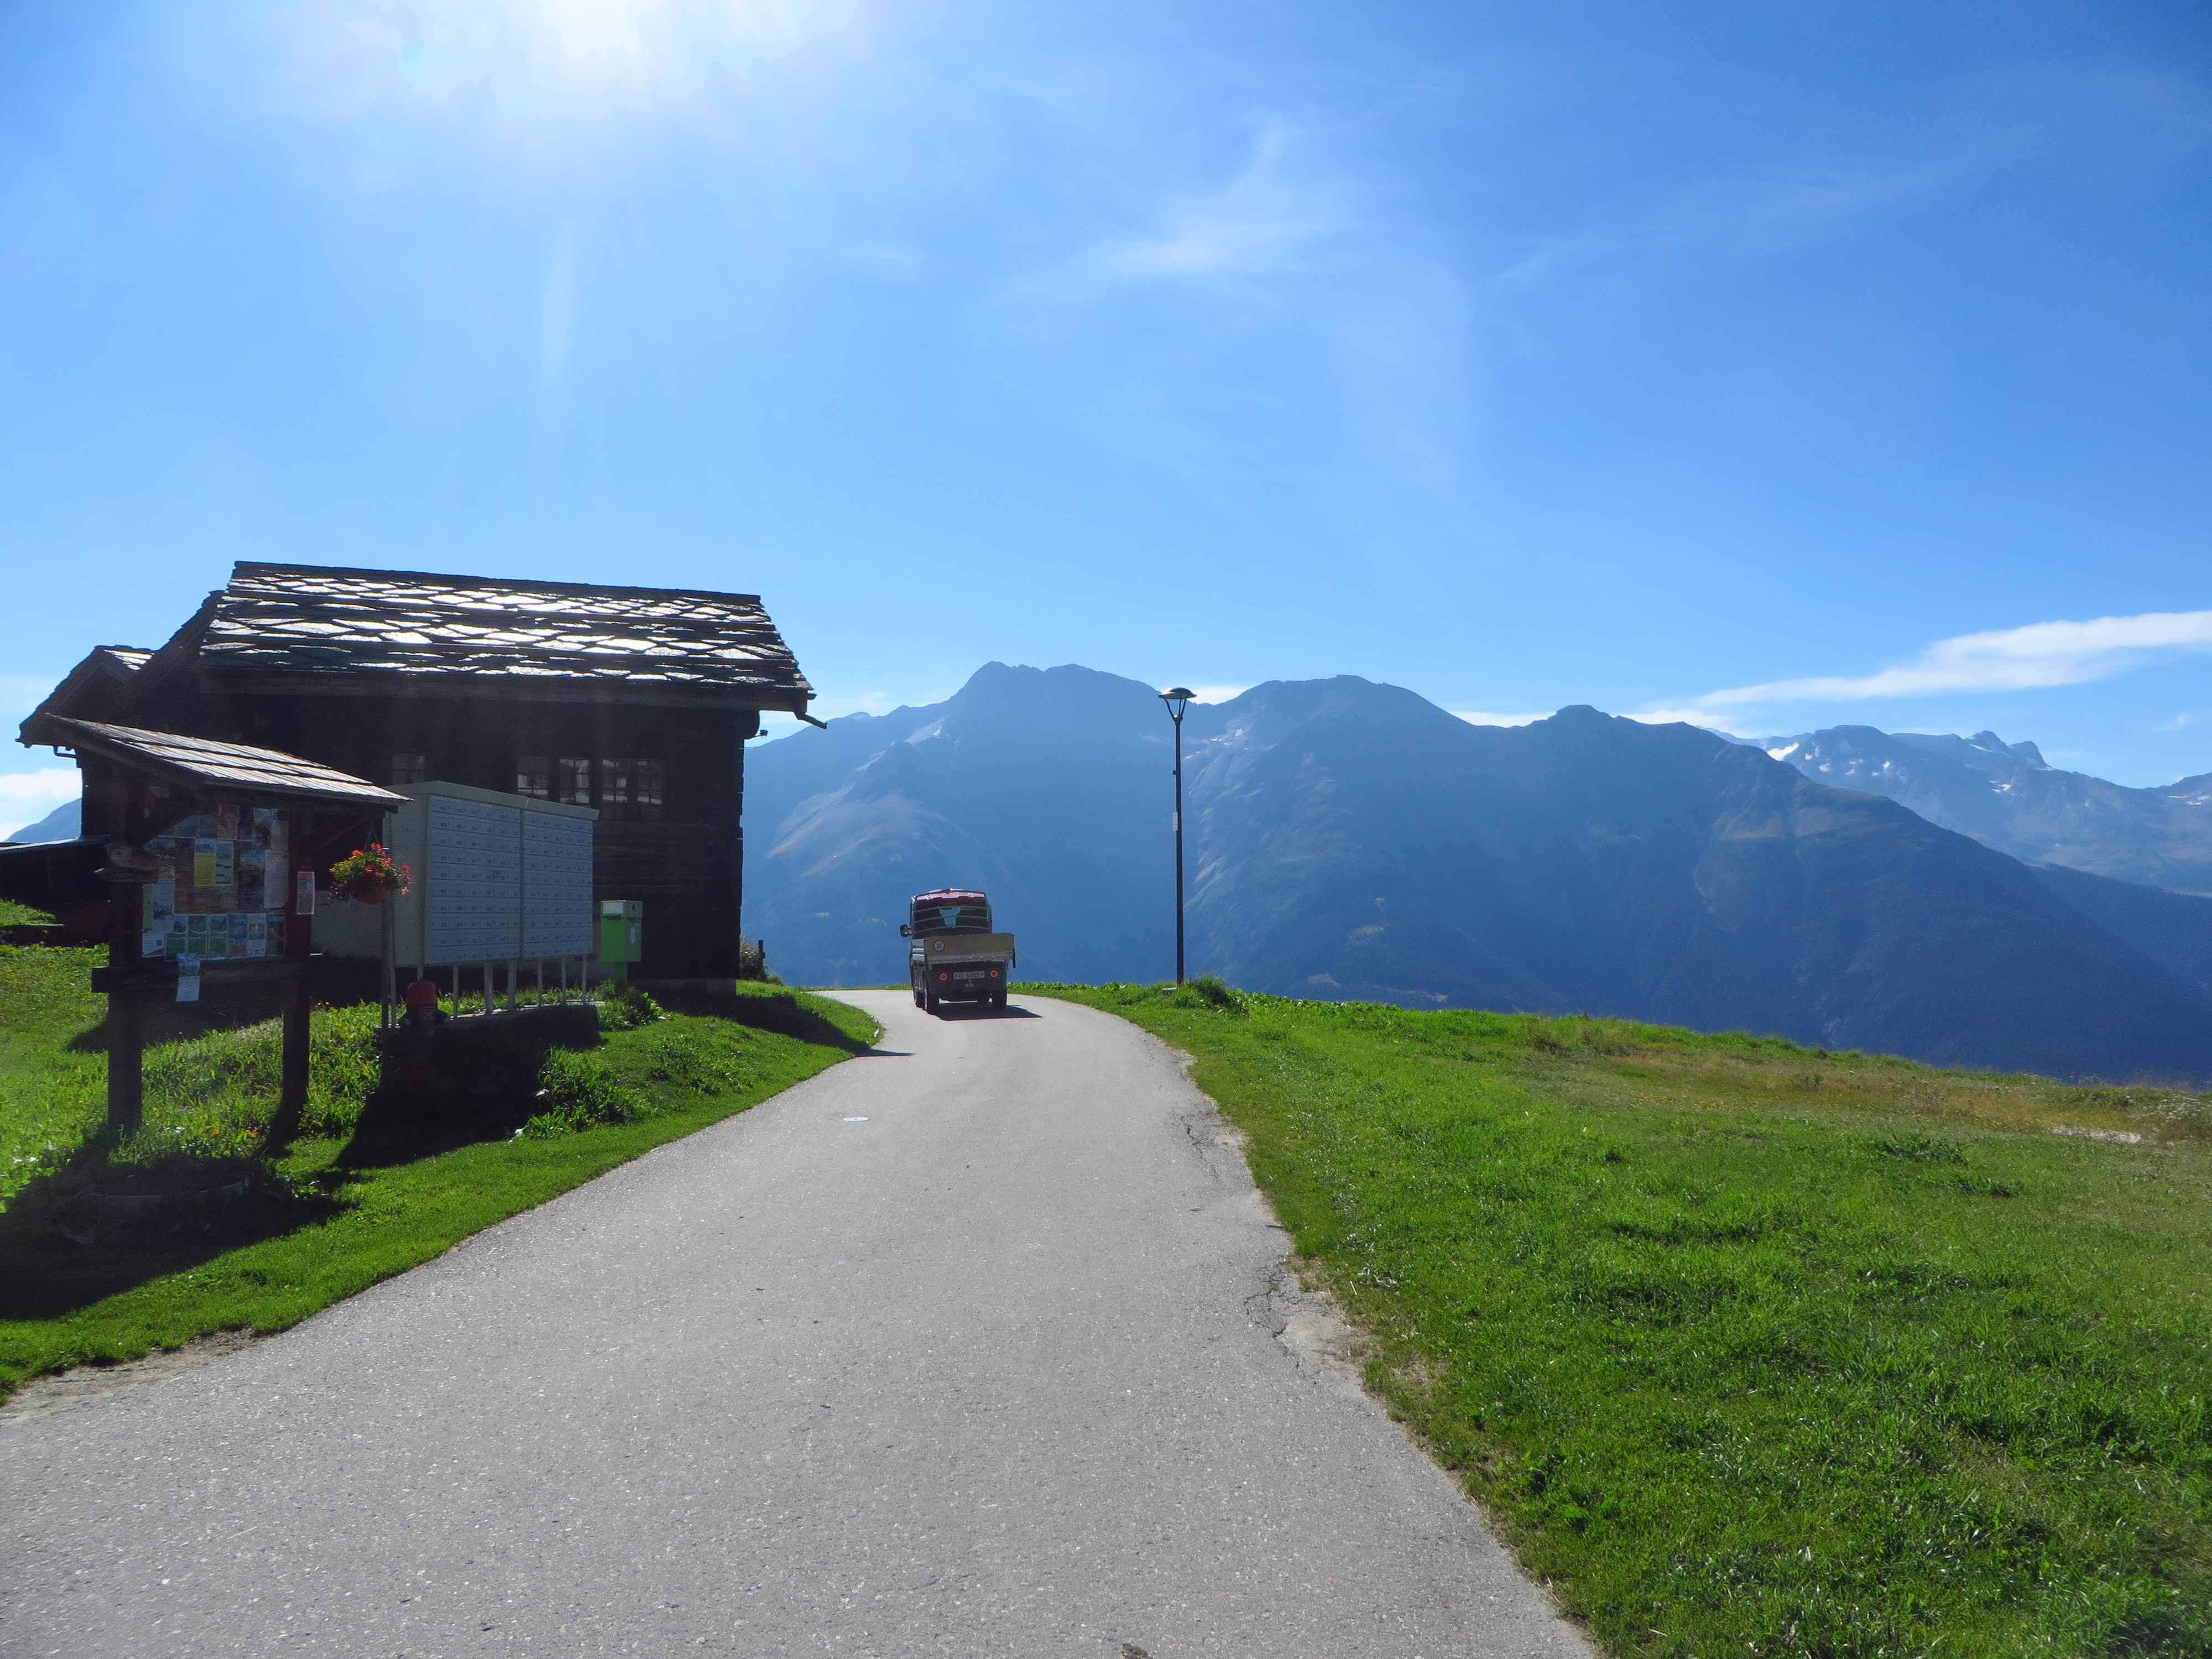 General 4000x3000 Switzerland Aletsch Glacier Rideralp mountains road vehicle sky outdoors log cabin nature Alps